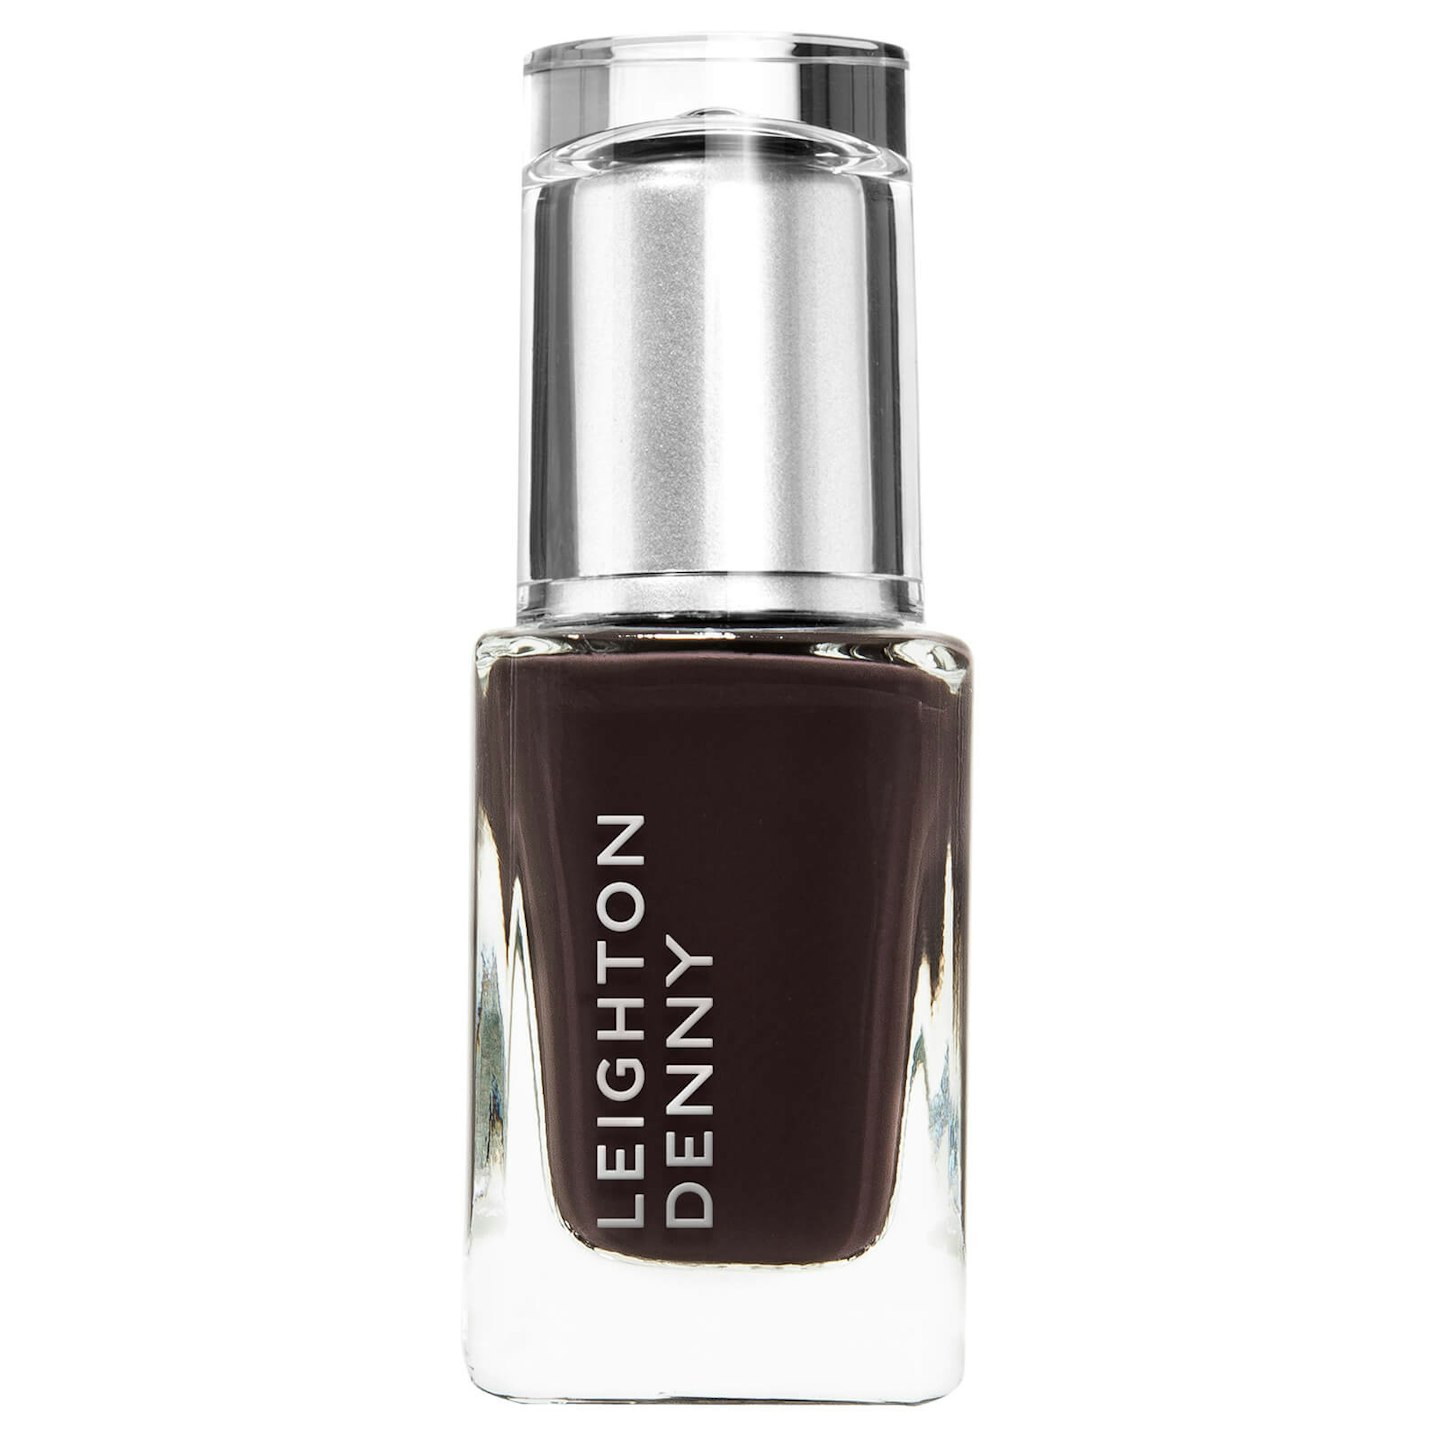 Leighton Denny High Performance Nail Polish The Heritage Collection in Take Your Wellies, £12